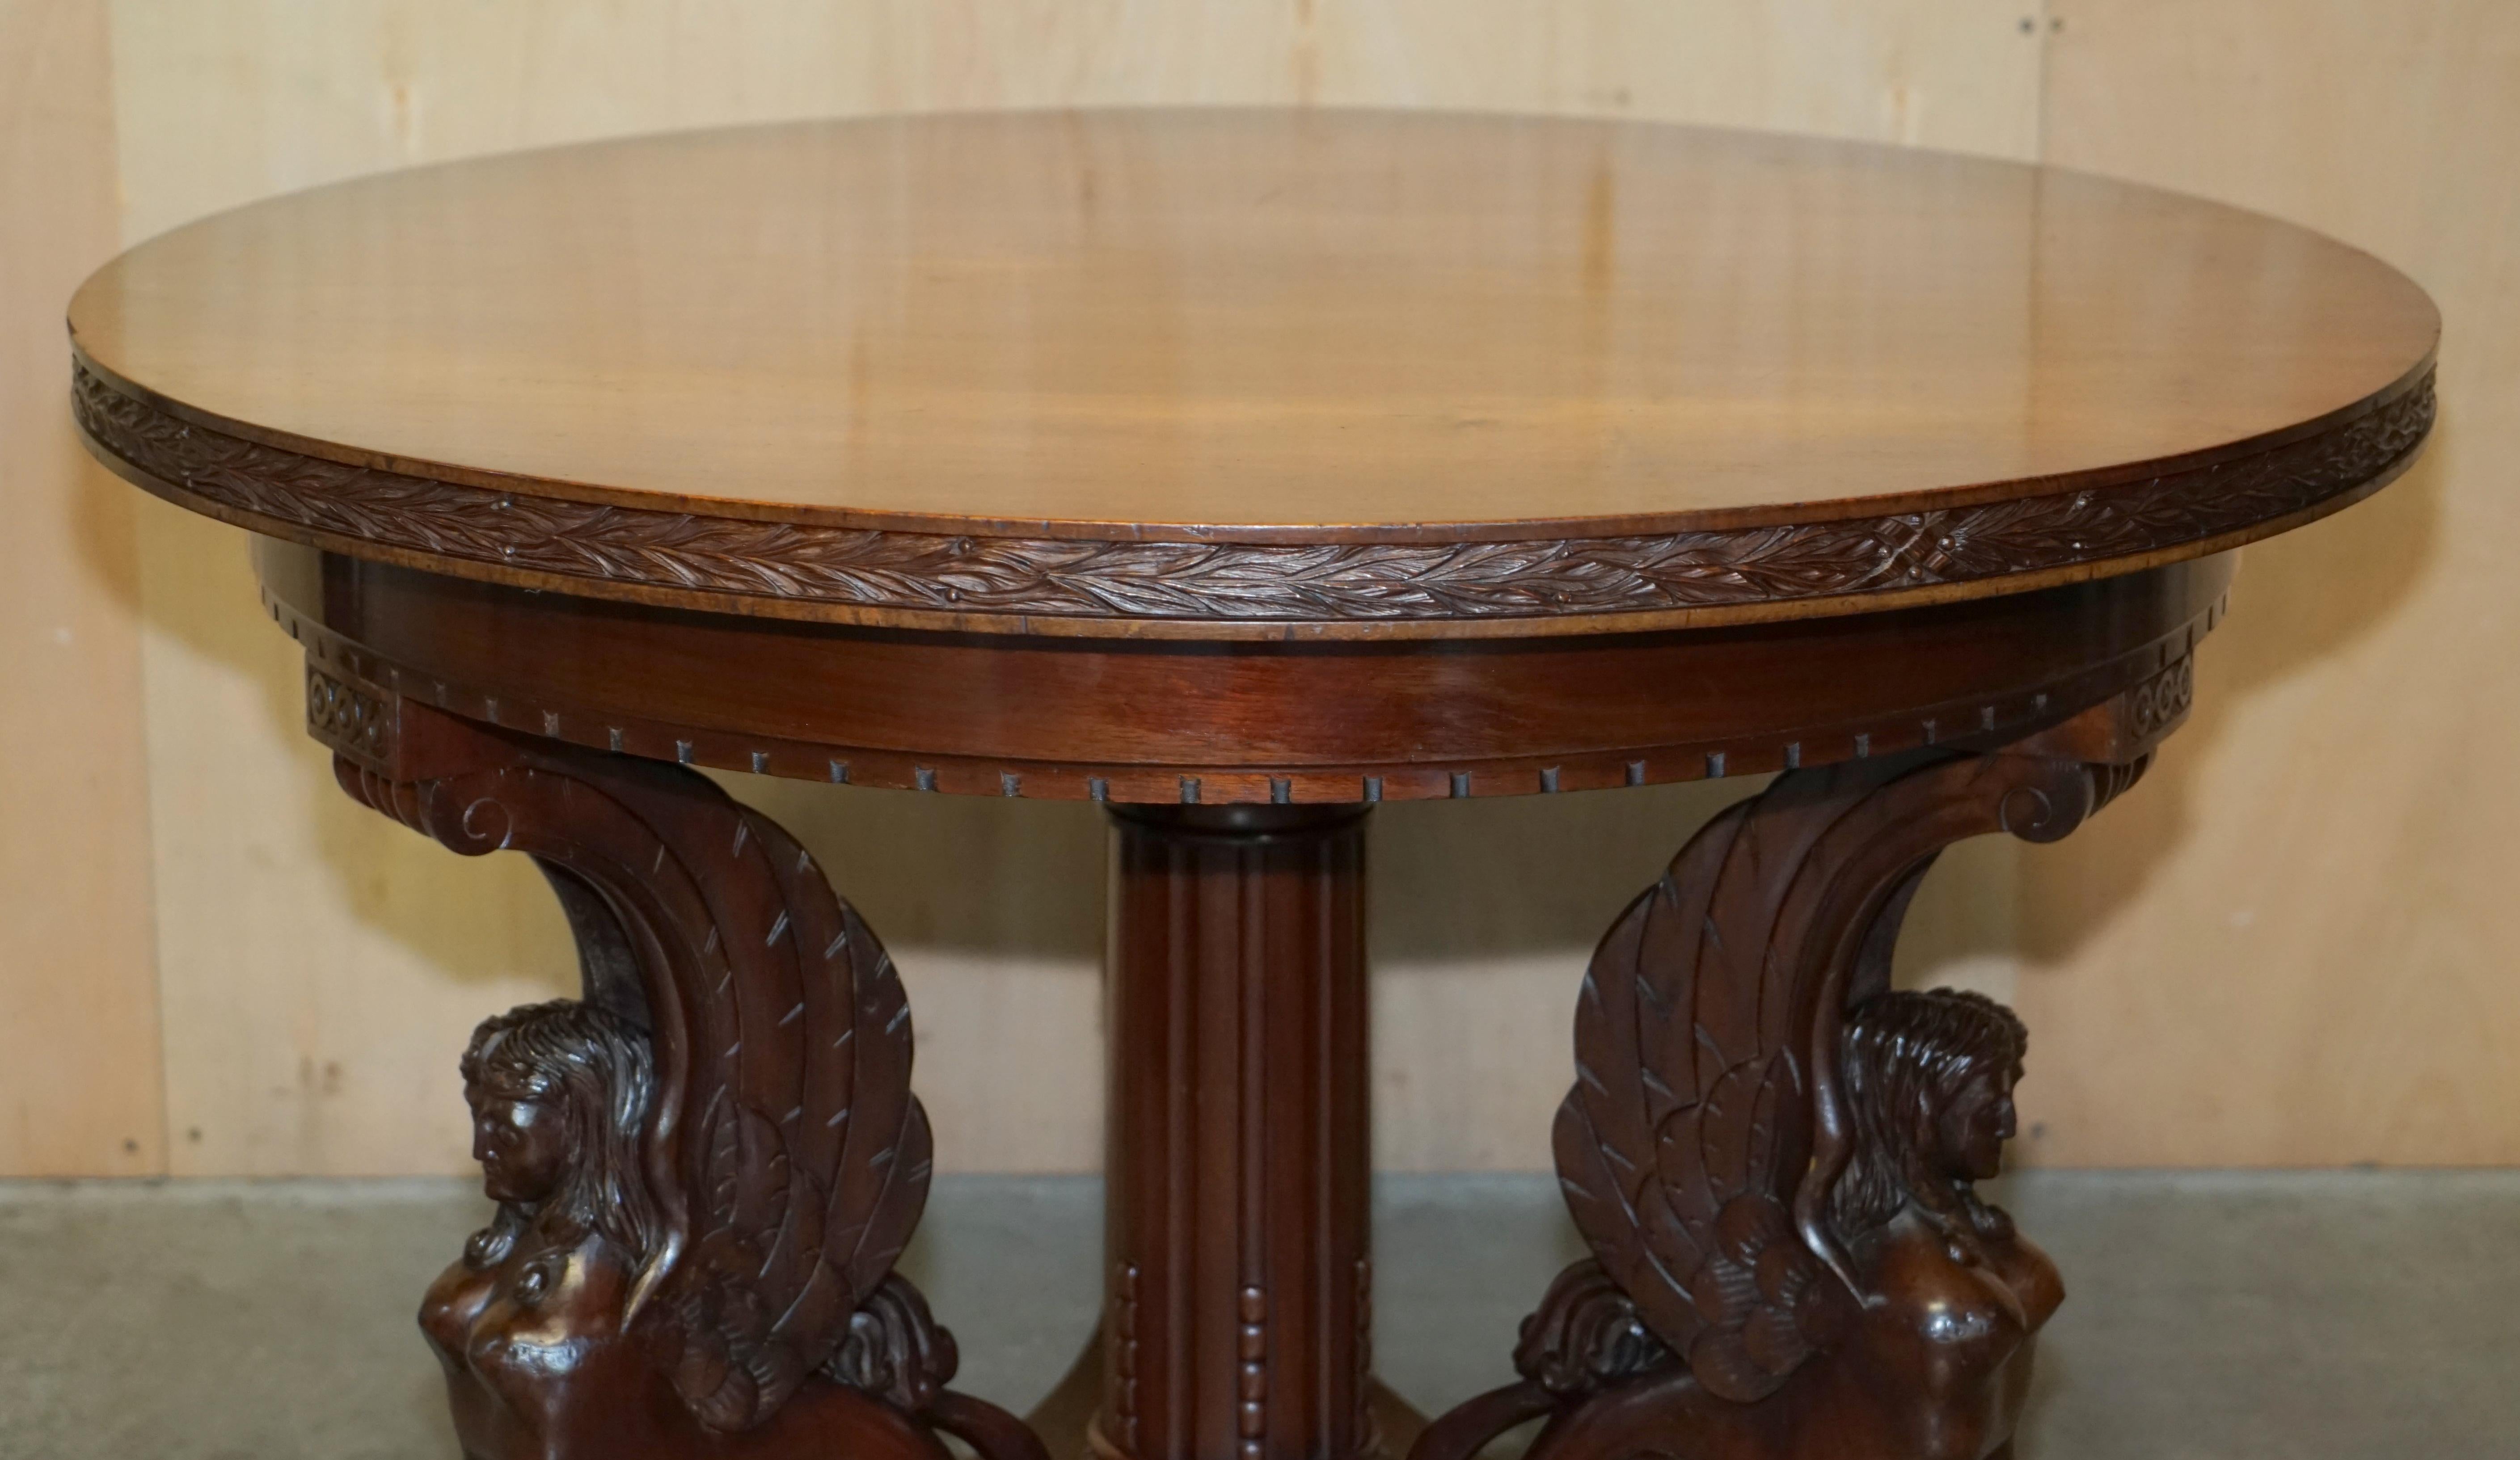 We are delighted to offer for sale this stunning Antique French Neoclassical centre table with ornately carved Sphinx pillared legs which is part of a suite

This table is part of a suite as mentioned, I also have a rather lovely pair of large